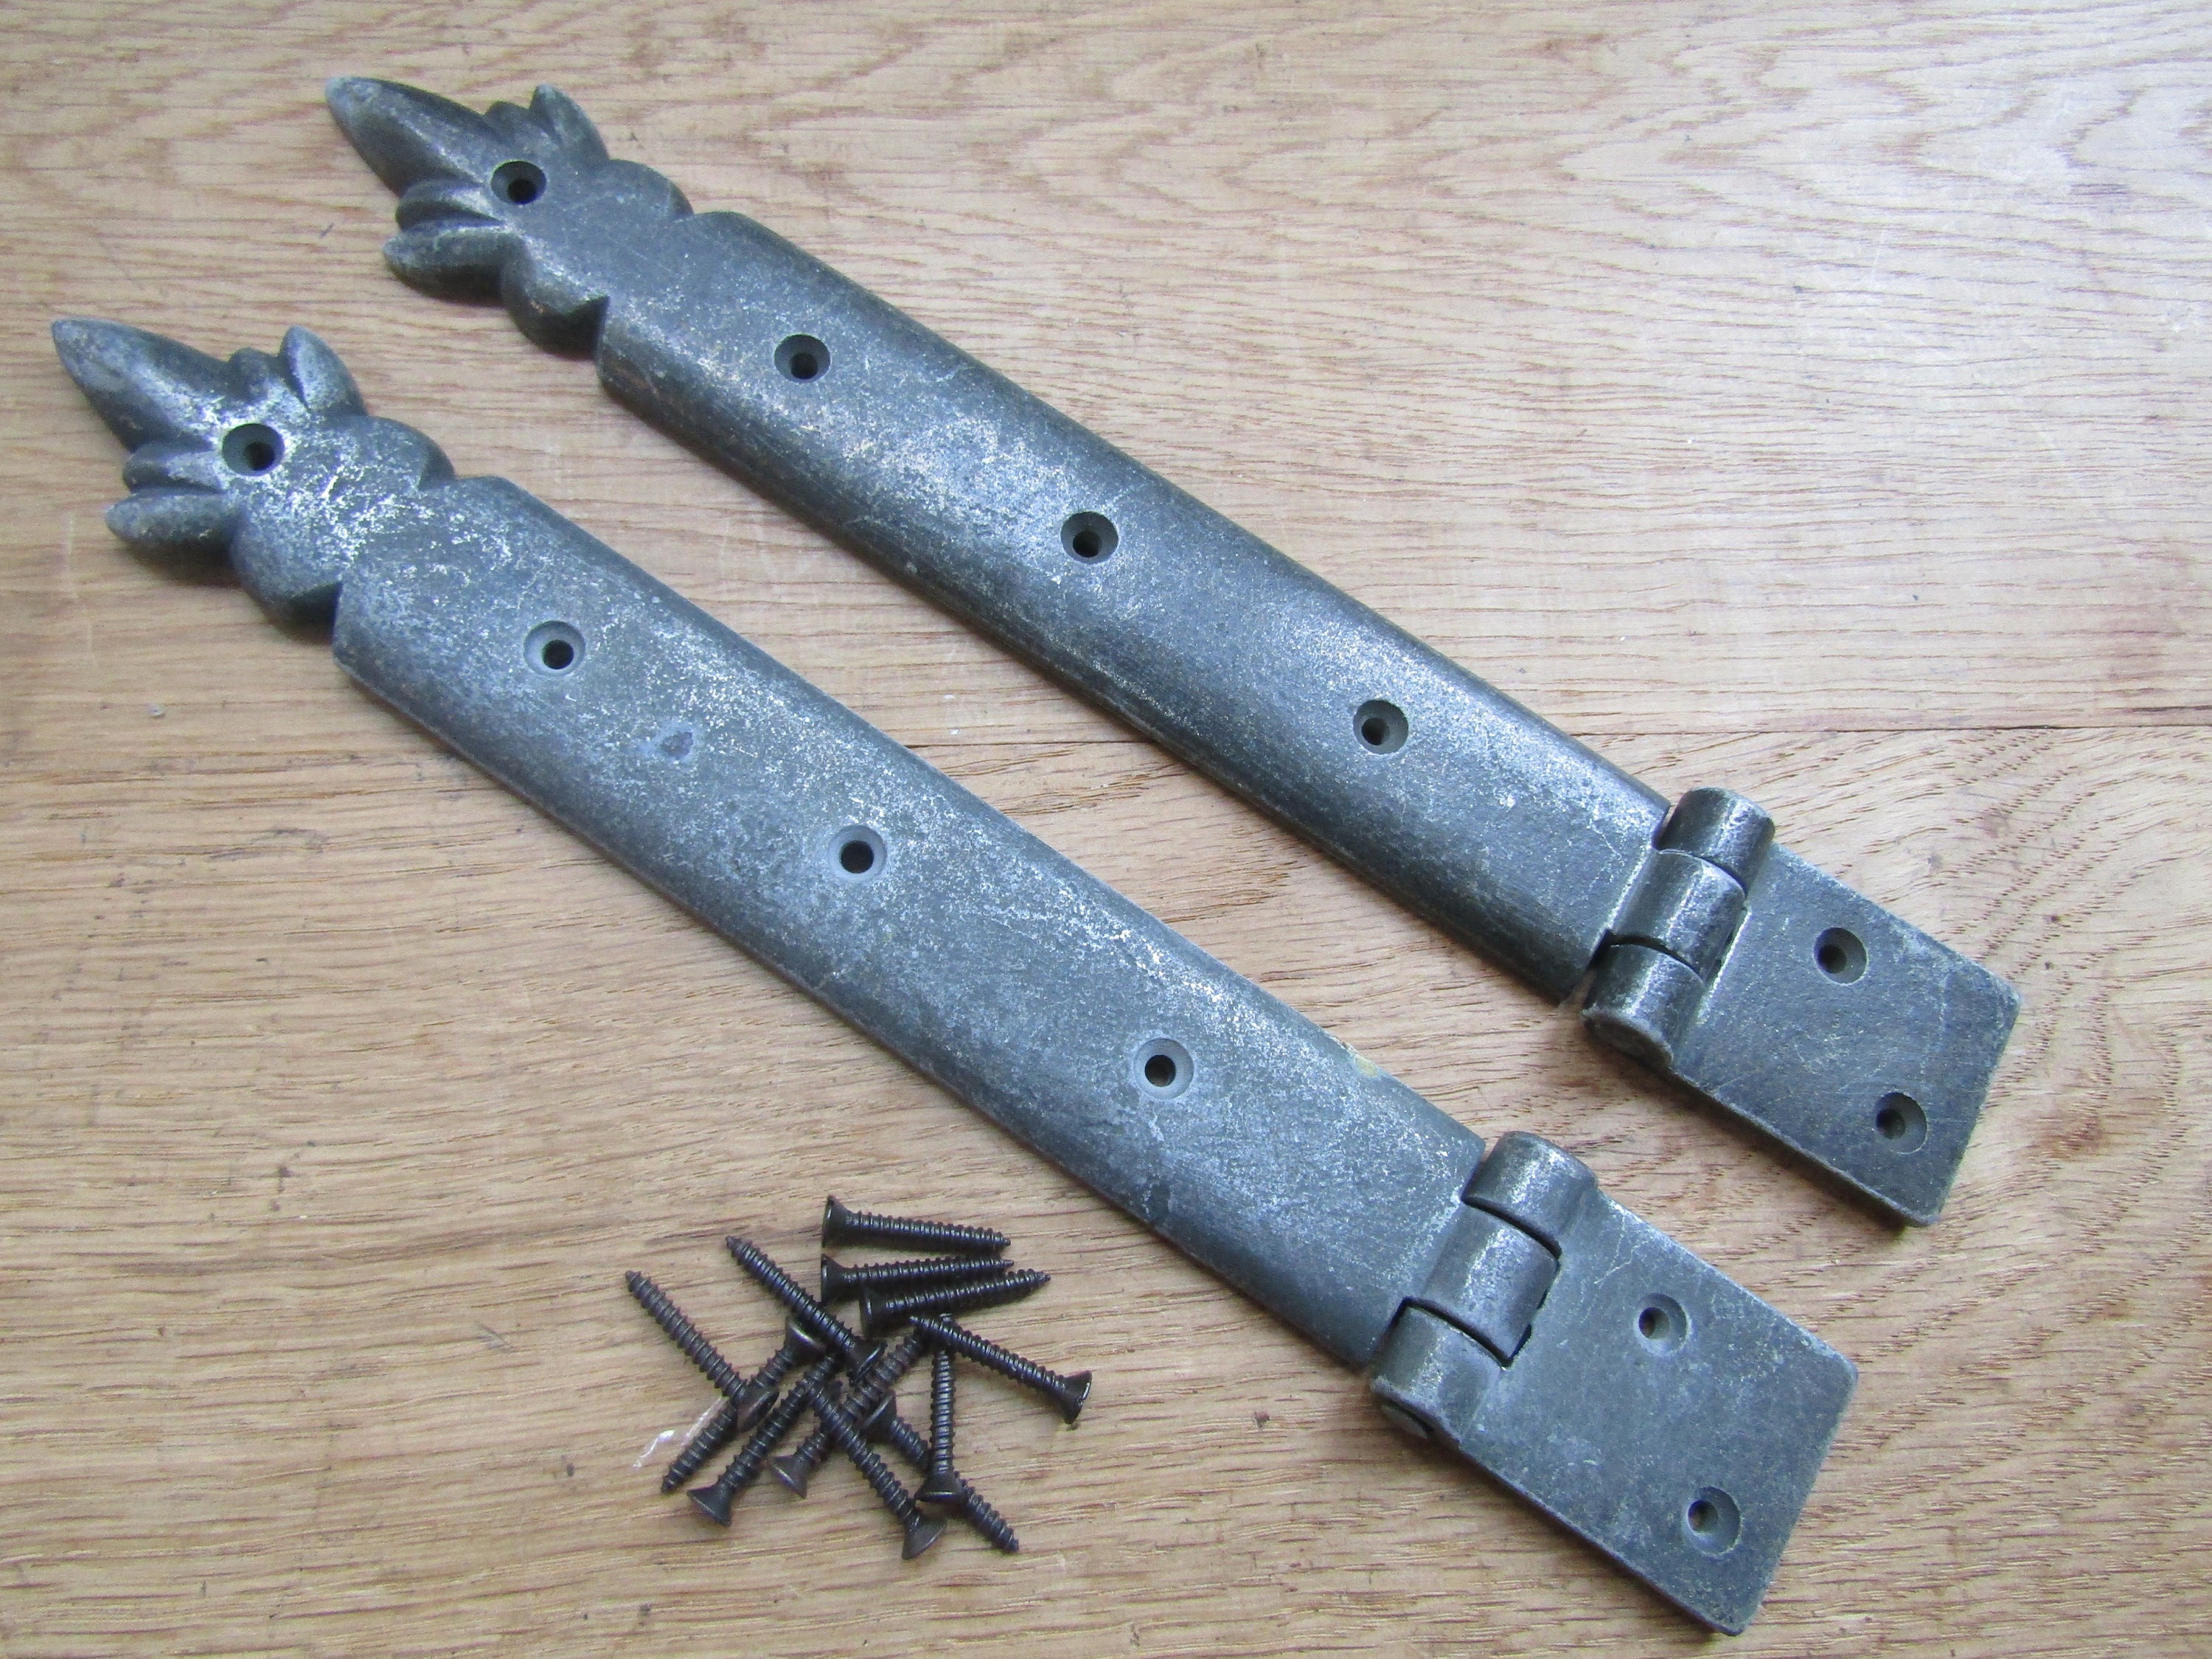 2 x ANTIQUE IRON STRAP CRANKED HINGES FOR CHEST TRUNK BLANKET STORAGE BOX CASE 